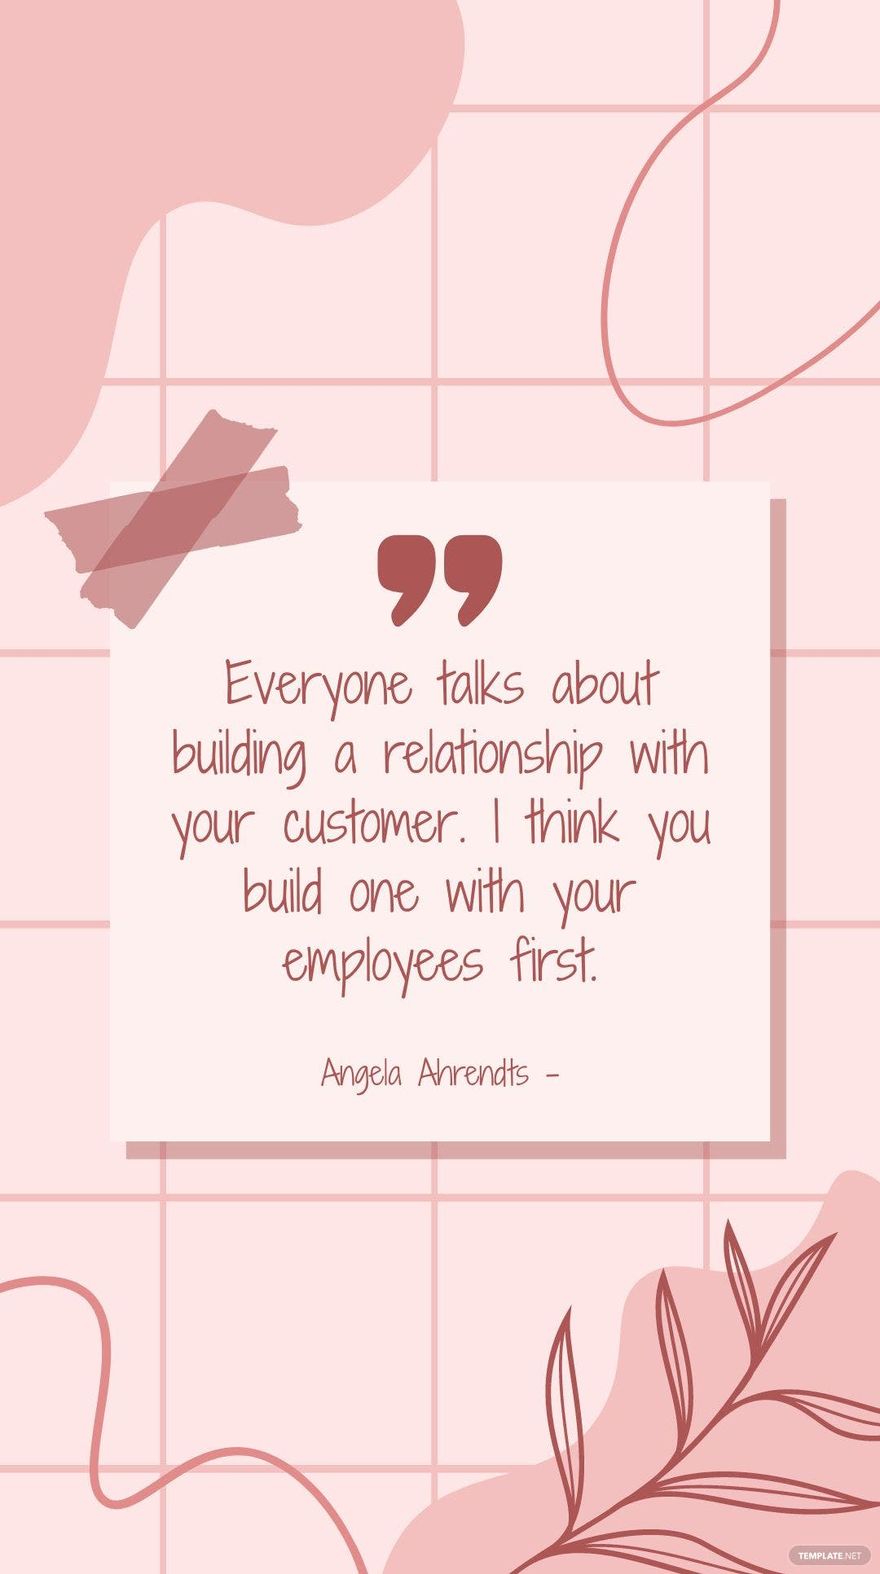 Angela Ahrendts - Everyone talks about building a relationship with your customer. I think you build one with your employees first. Template